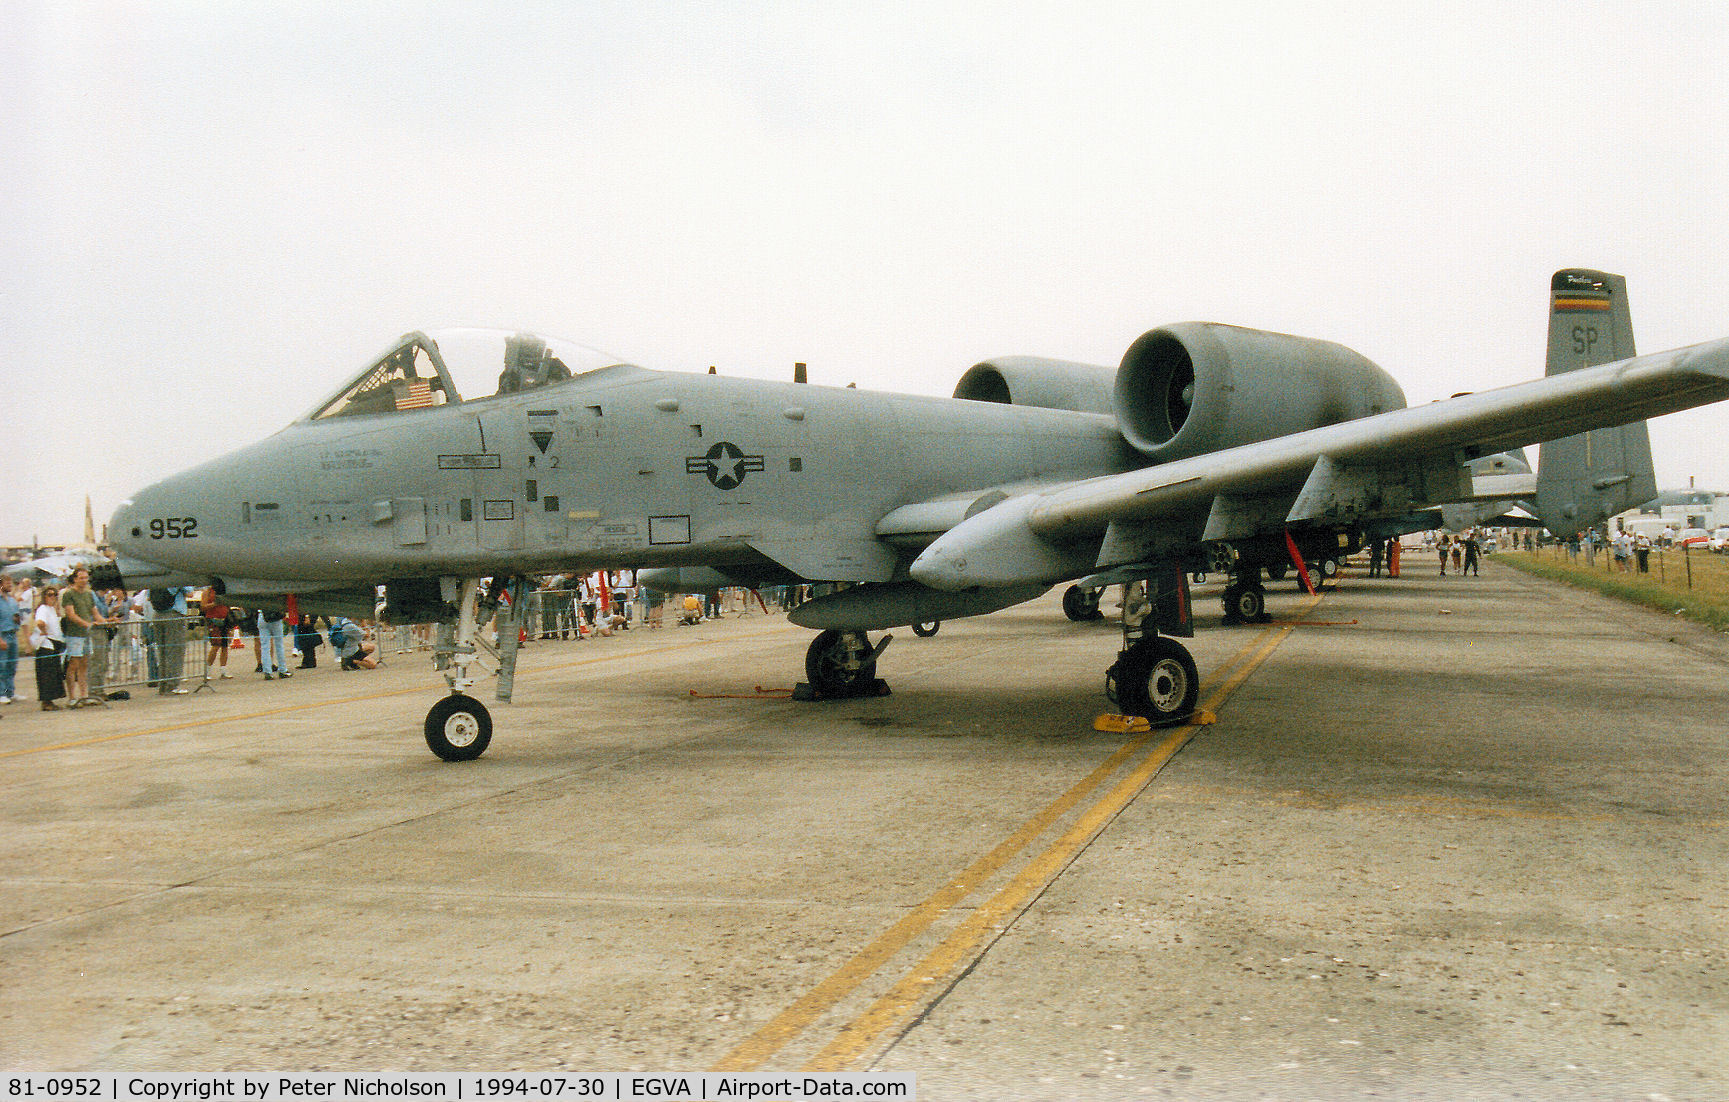 81-0952, 1981 Fairchild Republic A-10A Thunderbolt II C/N A10-0647, Another view of Warhog 1, an A-10A Thunderbolt of Spangdahlem's 81st Fighter Squadron/52nd Fighter Wing on display at the 1994 Intnl Air Tattoo at RAF Fairford.